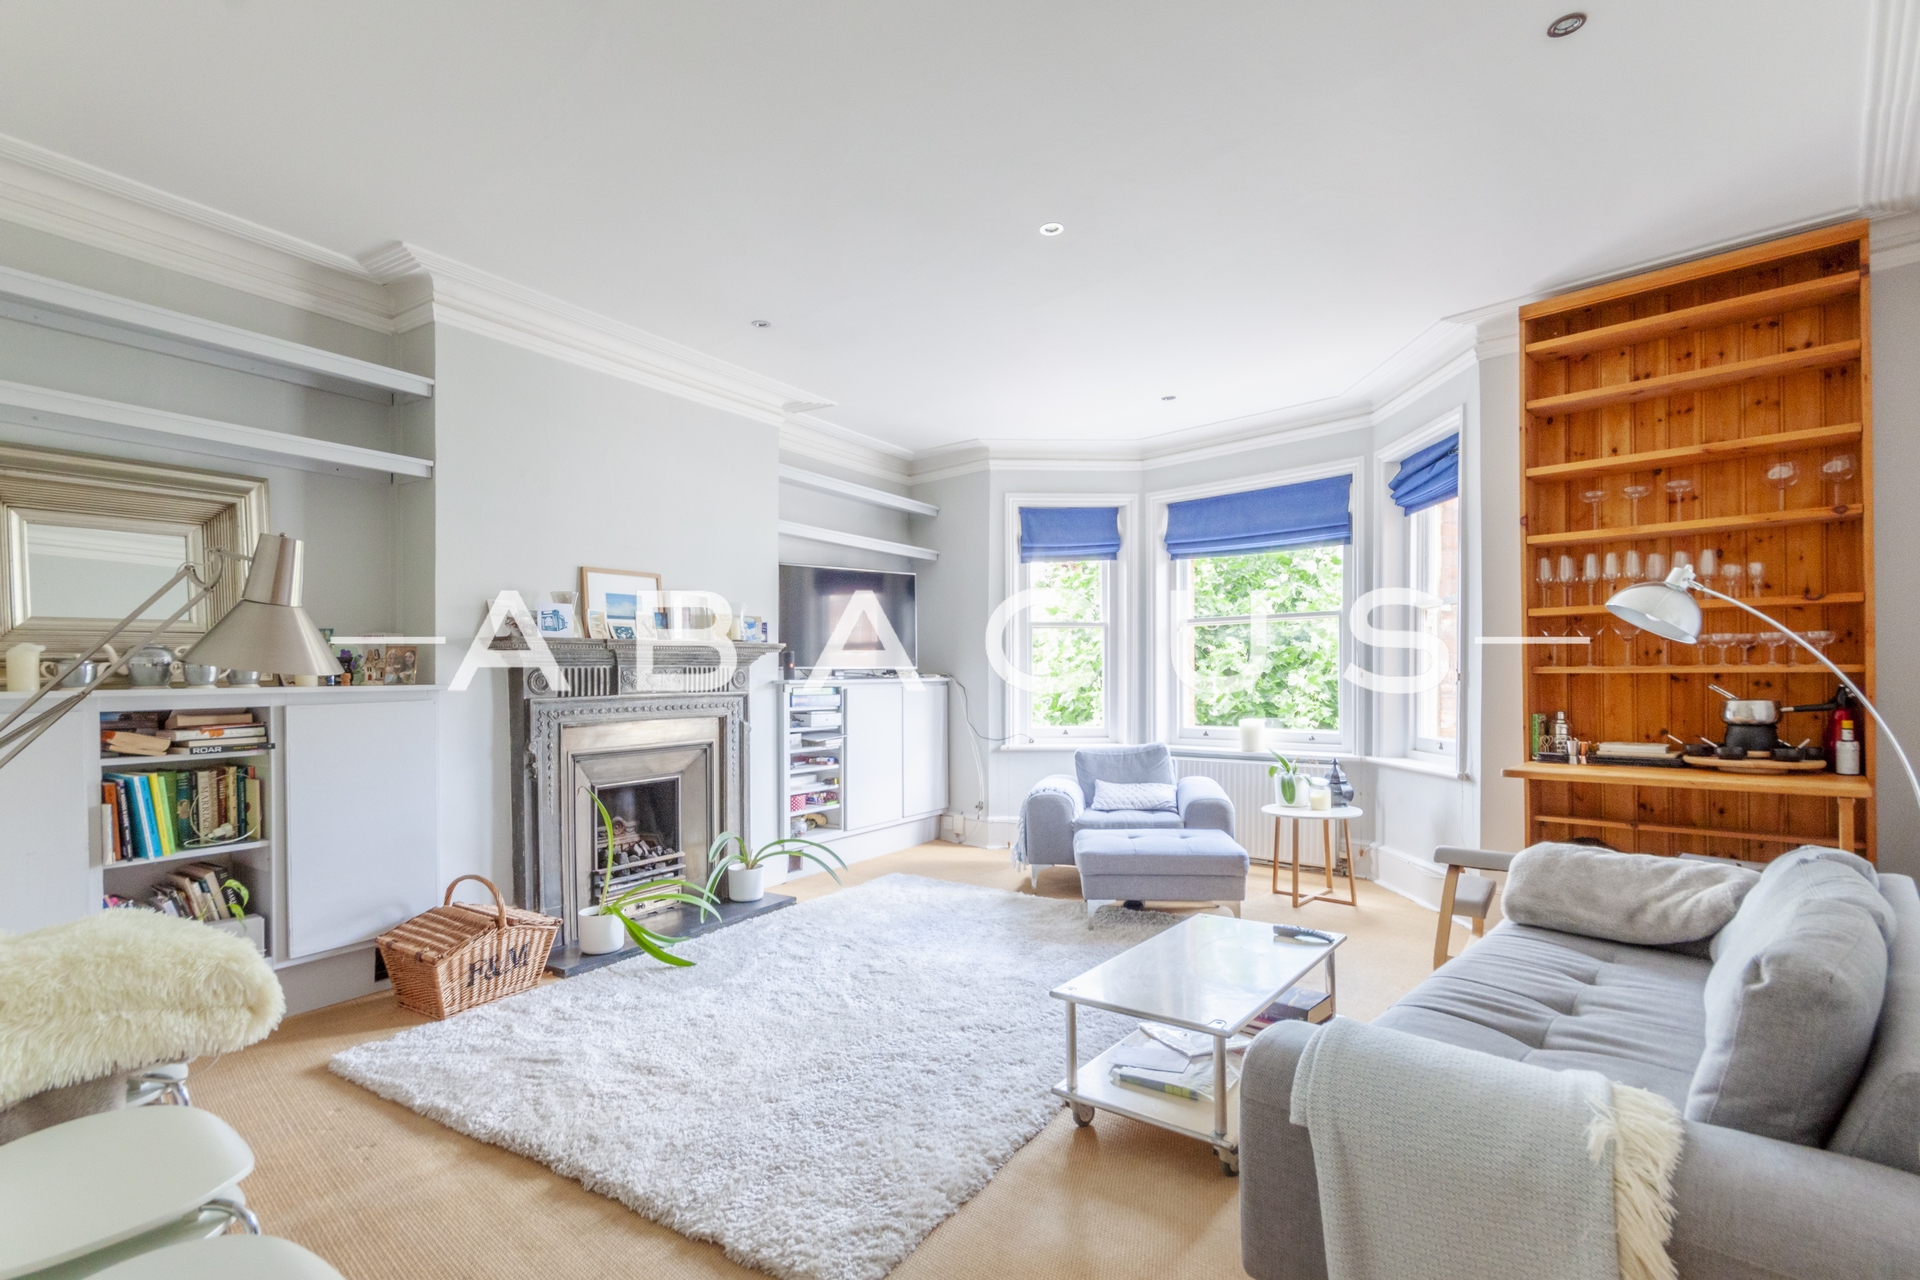 Similar Property: Mansion Block in West Hampstead